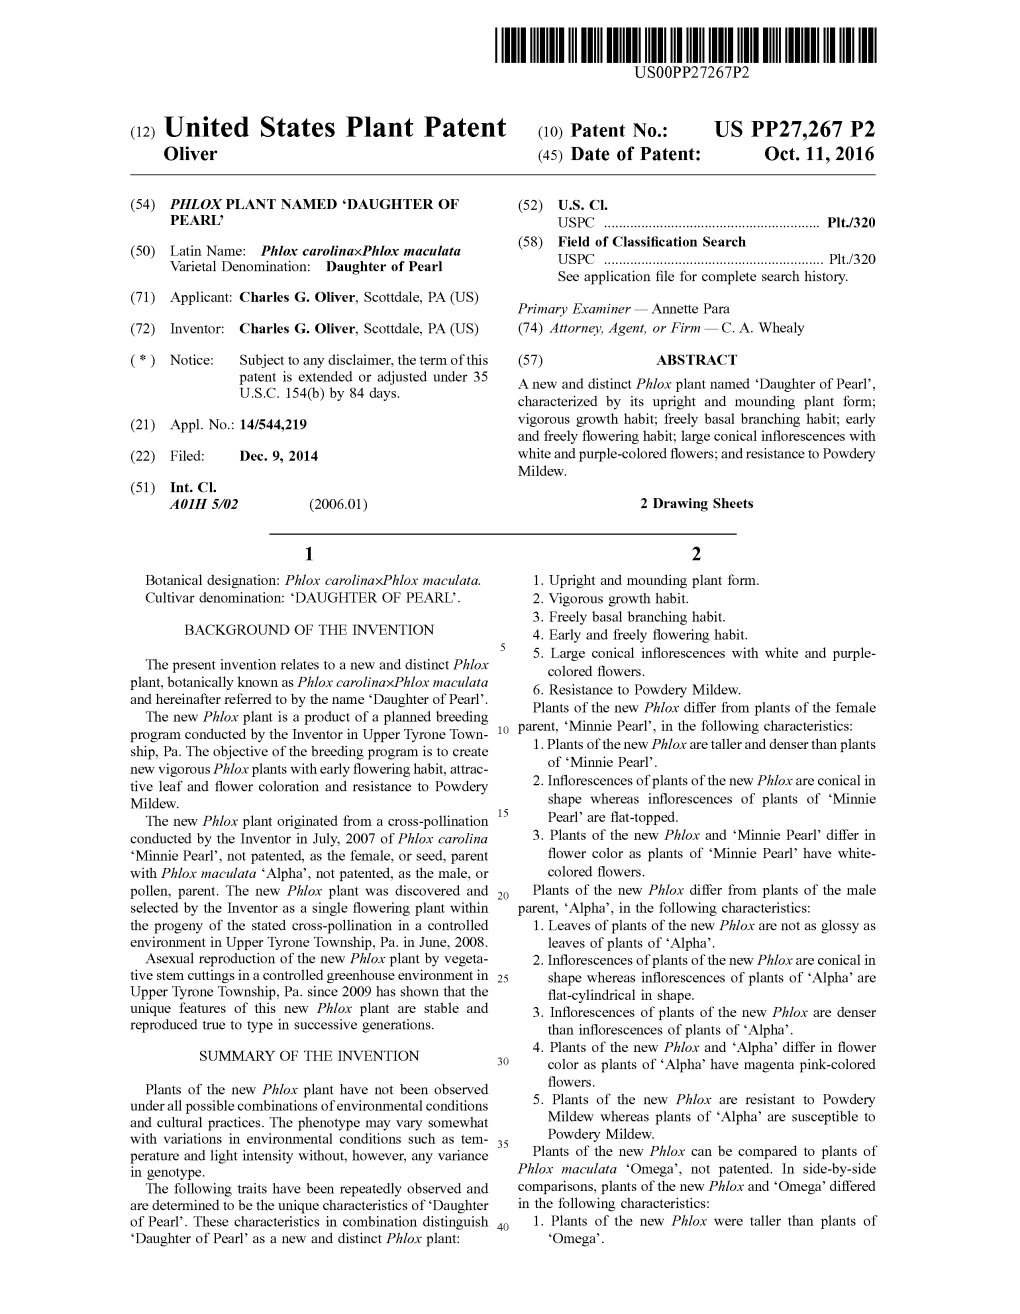 (12) United States Plant Patent (10) Patent No.: US PP27,267 P2 Oliver (45) Date of Patent: Oct